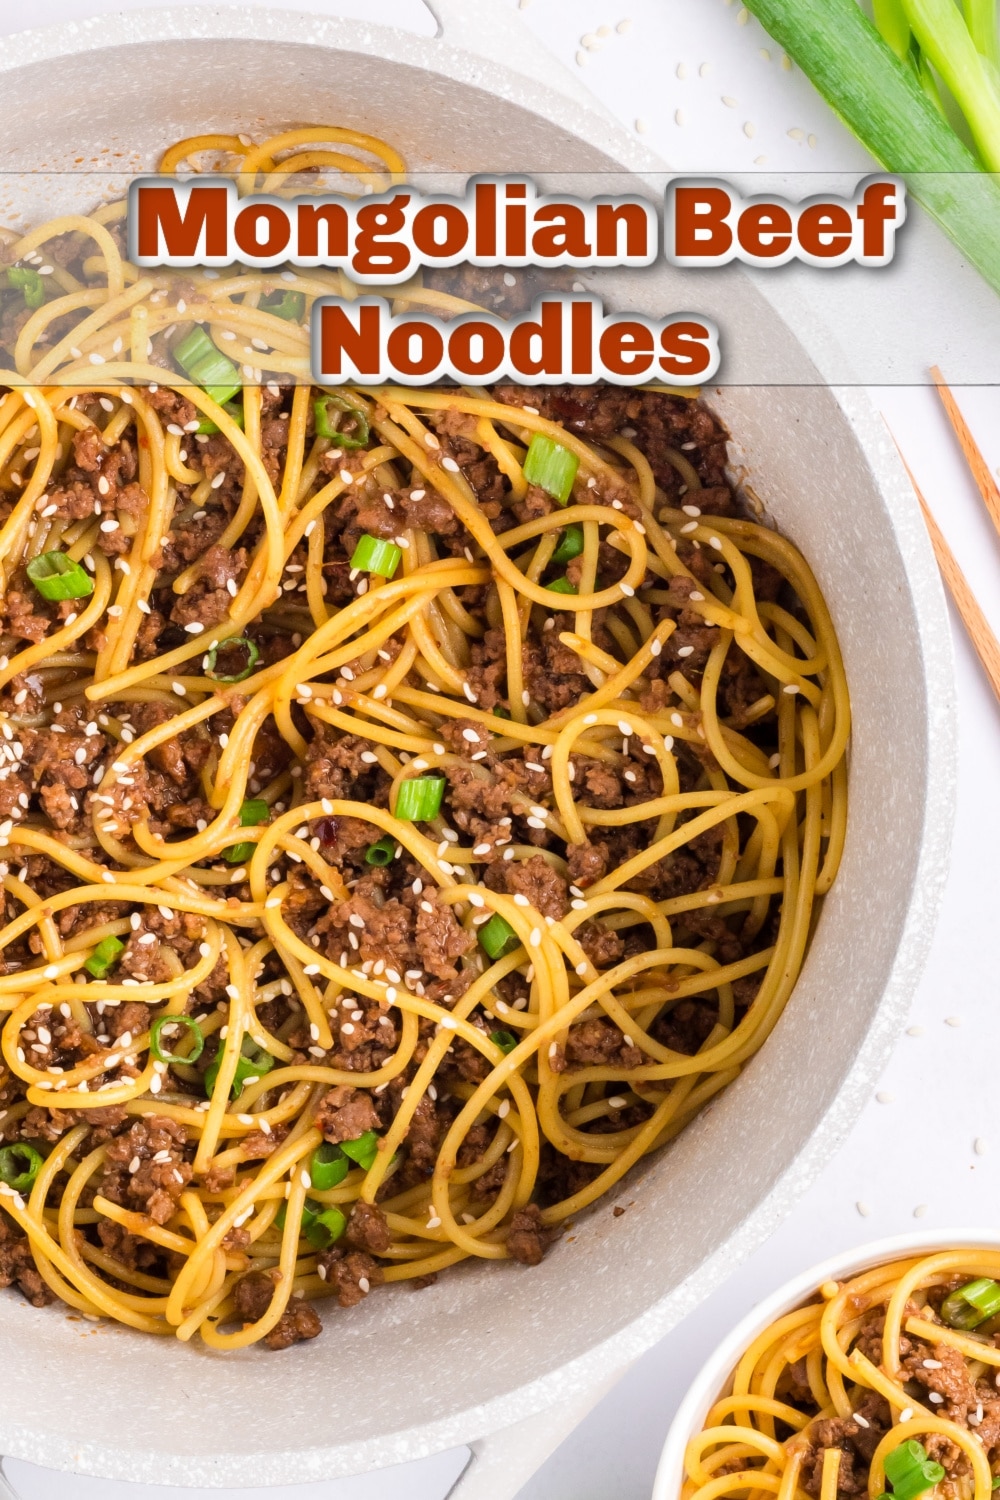 Try this delicious family-friendly recipe for Mongolian beef noodles. It's a quick and easy one-pot meal that will satisfy your takeout craving. The Asian flavors of sesame oil, soy sauce, ginger and hoisin come together in 30 minutes for the best homemade takeout! via @cmpollak1